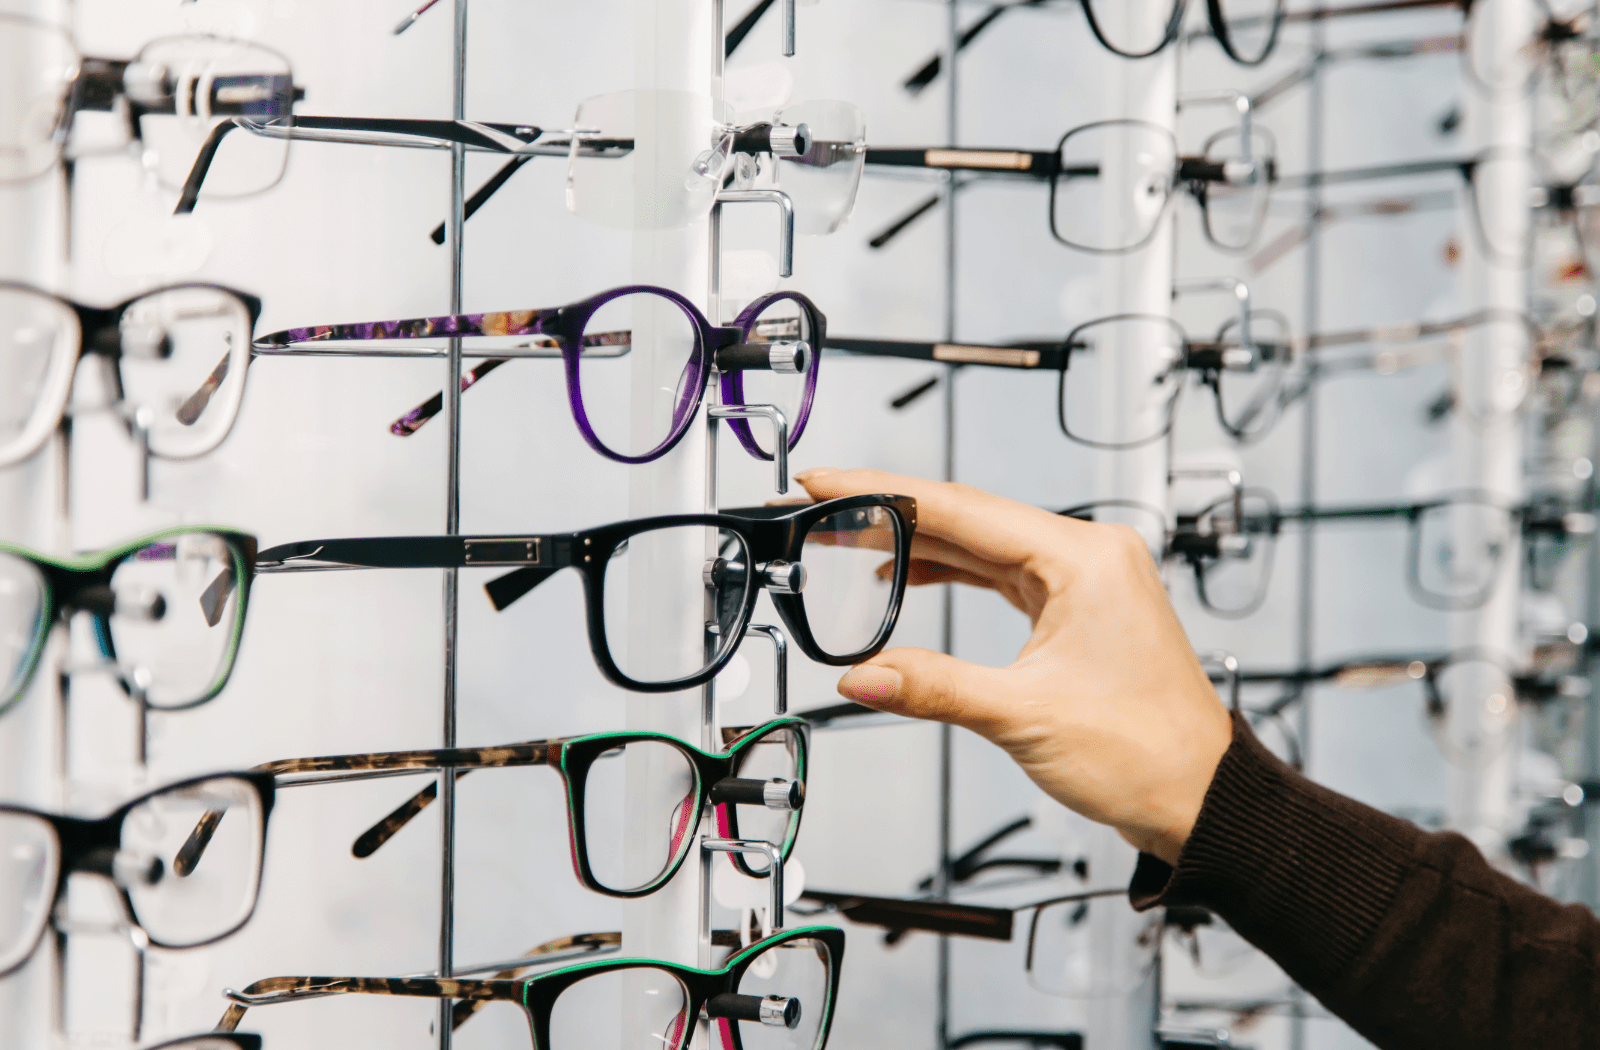 A woman's hand reaching for a pair of prescription glasses for sale to try them on